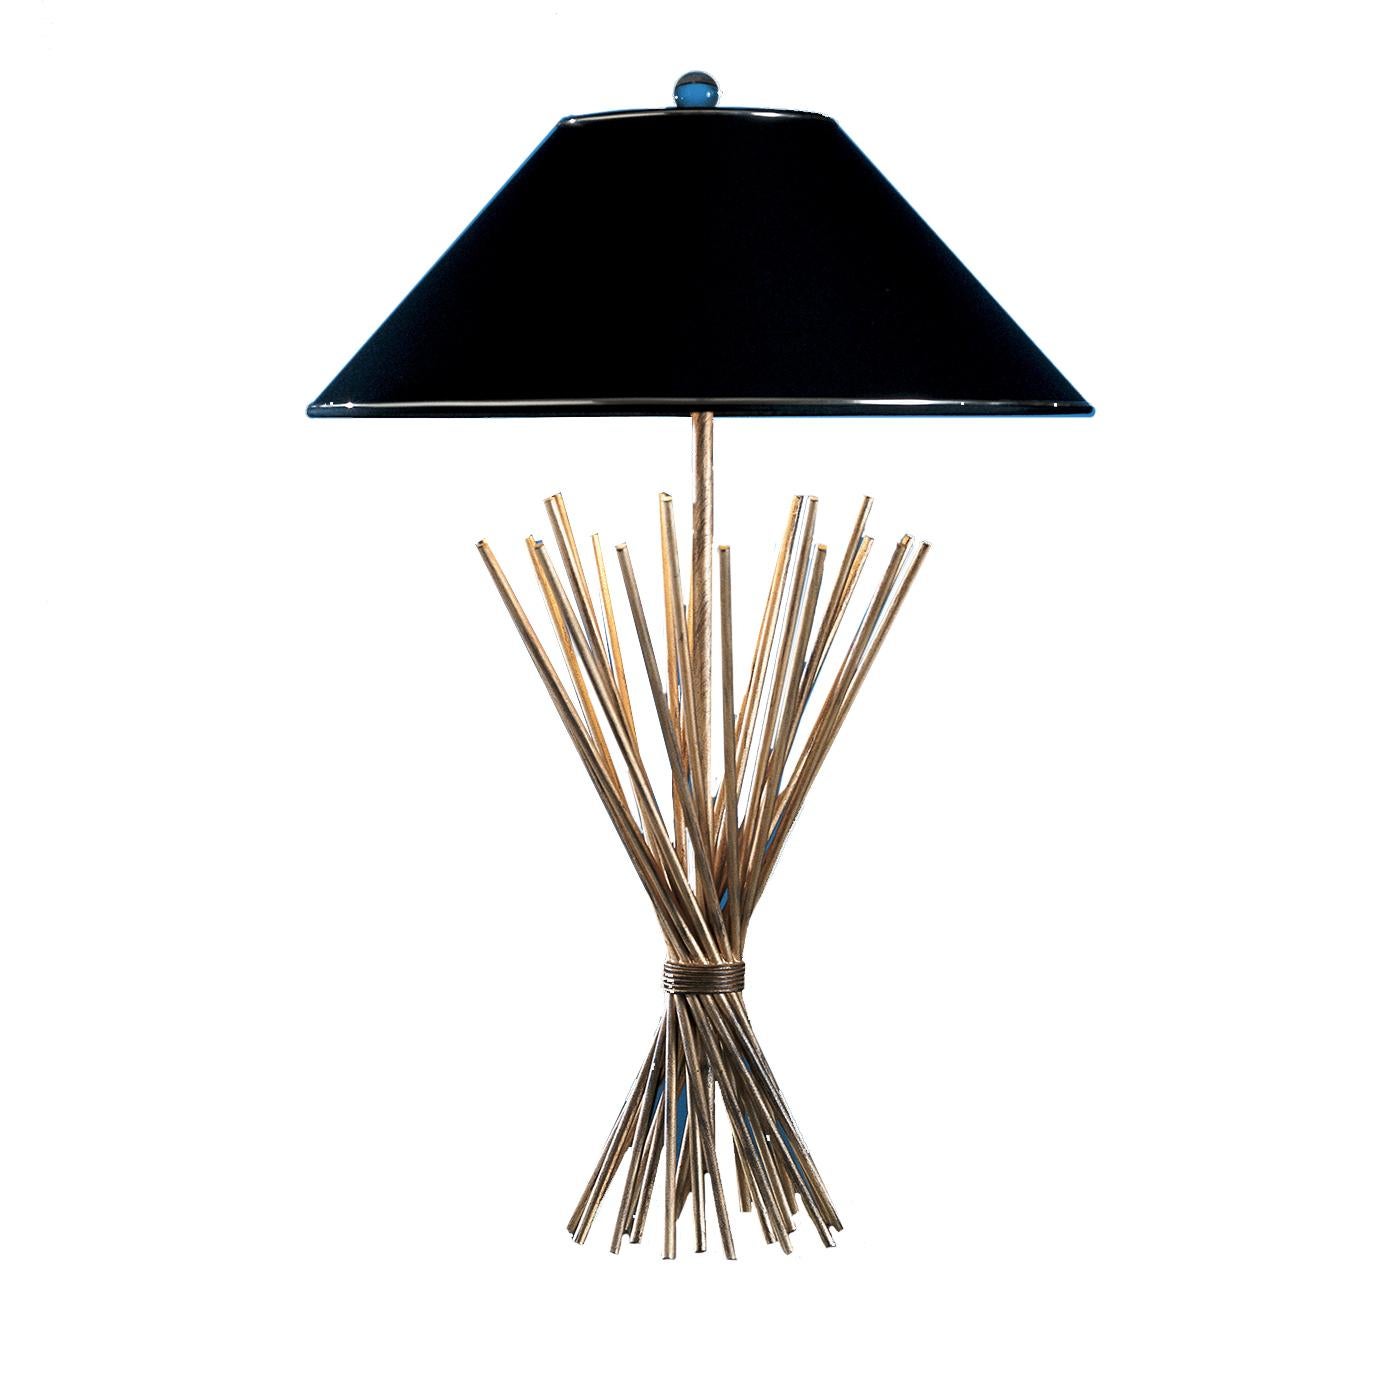 This striking table lamp is a magnificent example of fine craftsmanship and contemporary design. Its structure is made of several, hand-forged iron elements stemming vertically like a bunch of straws and gathered together with a horizontal iron